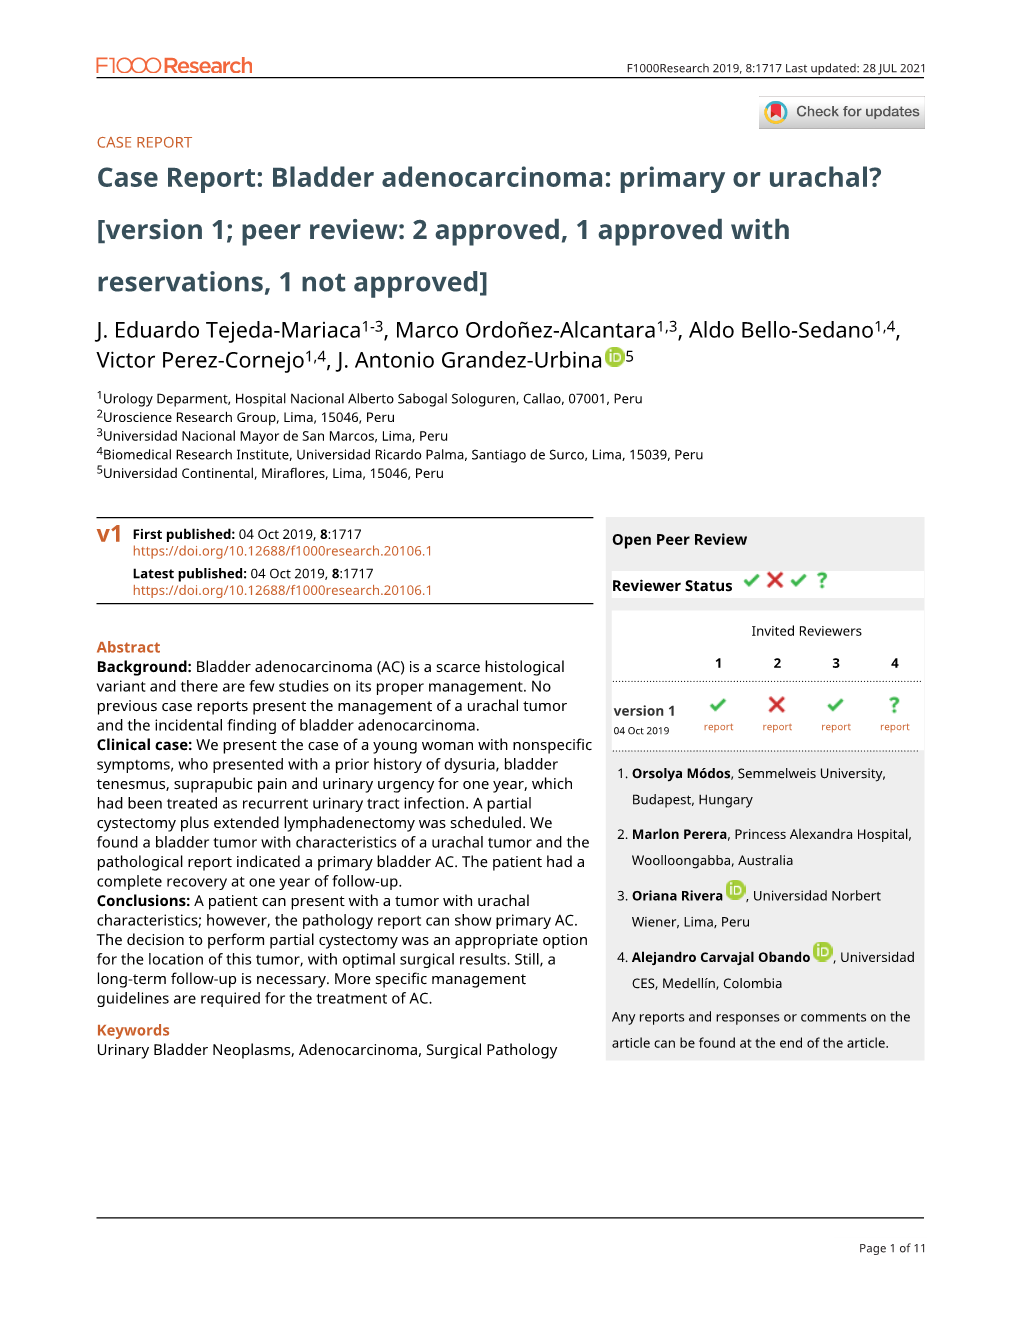 Case Report: Bladder Adenocarcinoma: Primary Or Urachal? [Version 1; Peer Review: 2 Approved, 1 Approved with Reservations, 1 Not Approved]